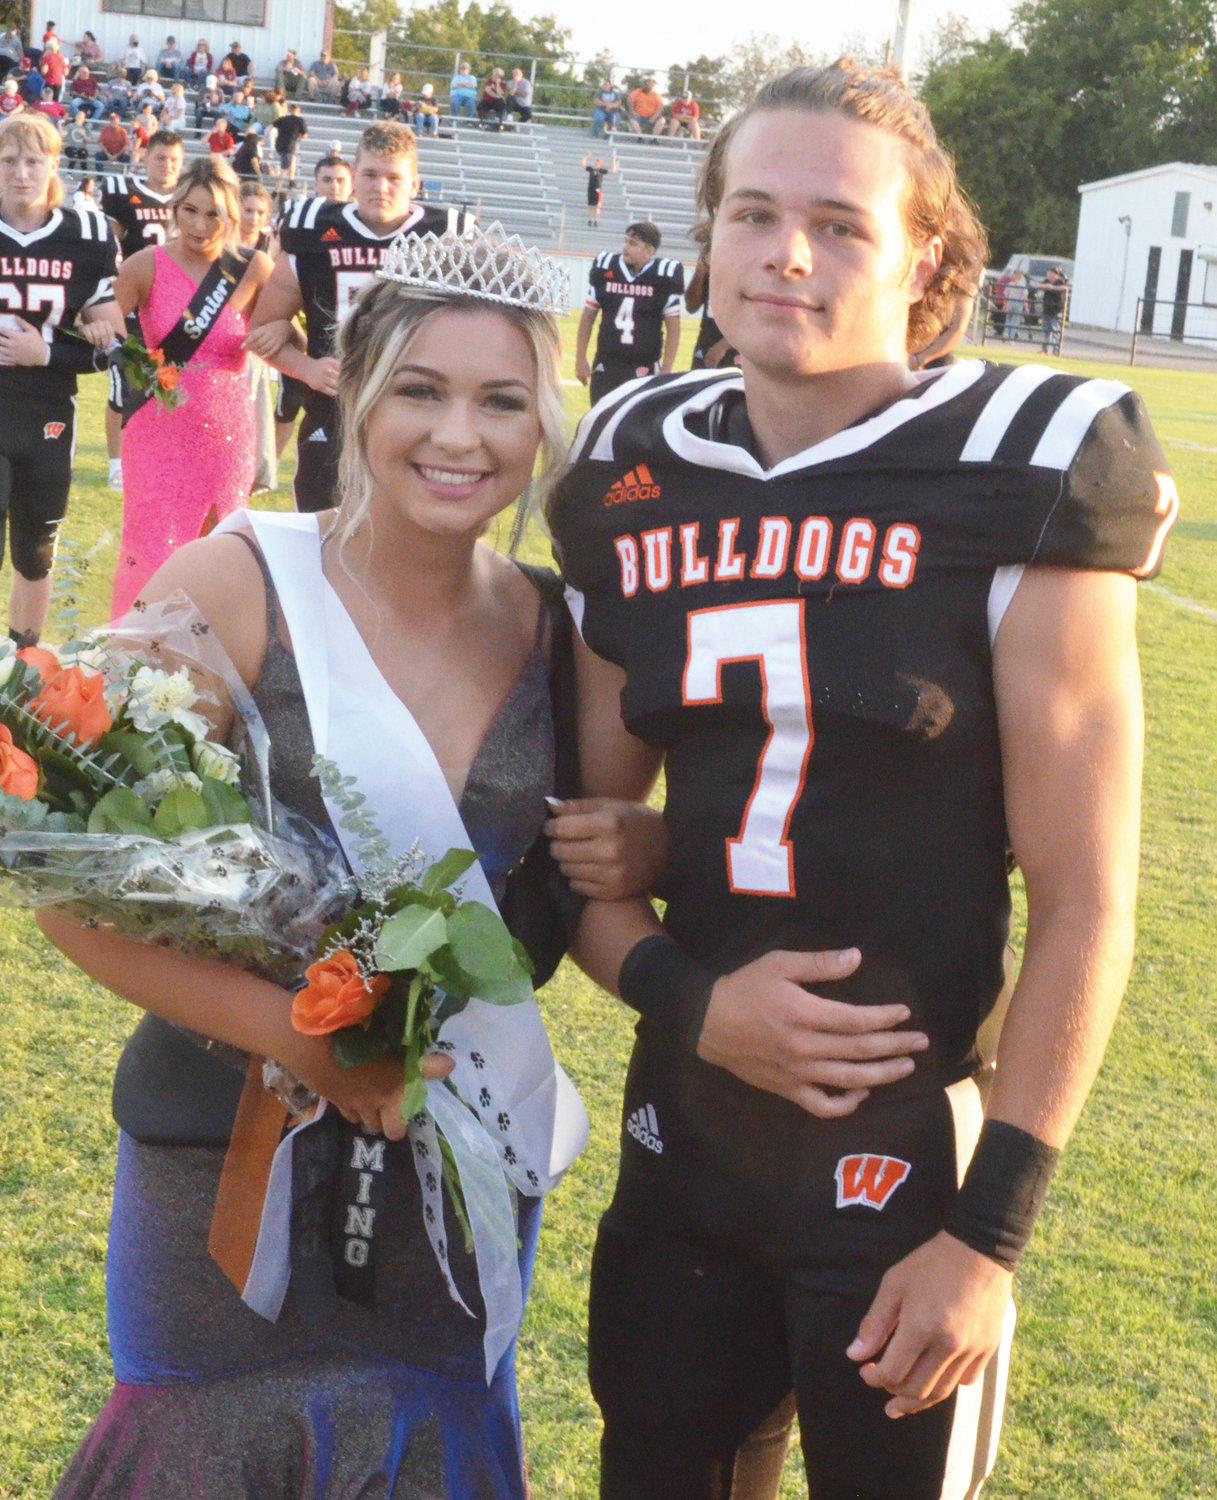 Homecoming Queen Haiden Parker and king Ethan Mullins were crowned Friday night during Wayne’s festivities at D.S. Zack Powell Stadium.